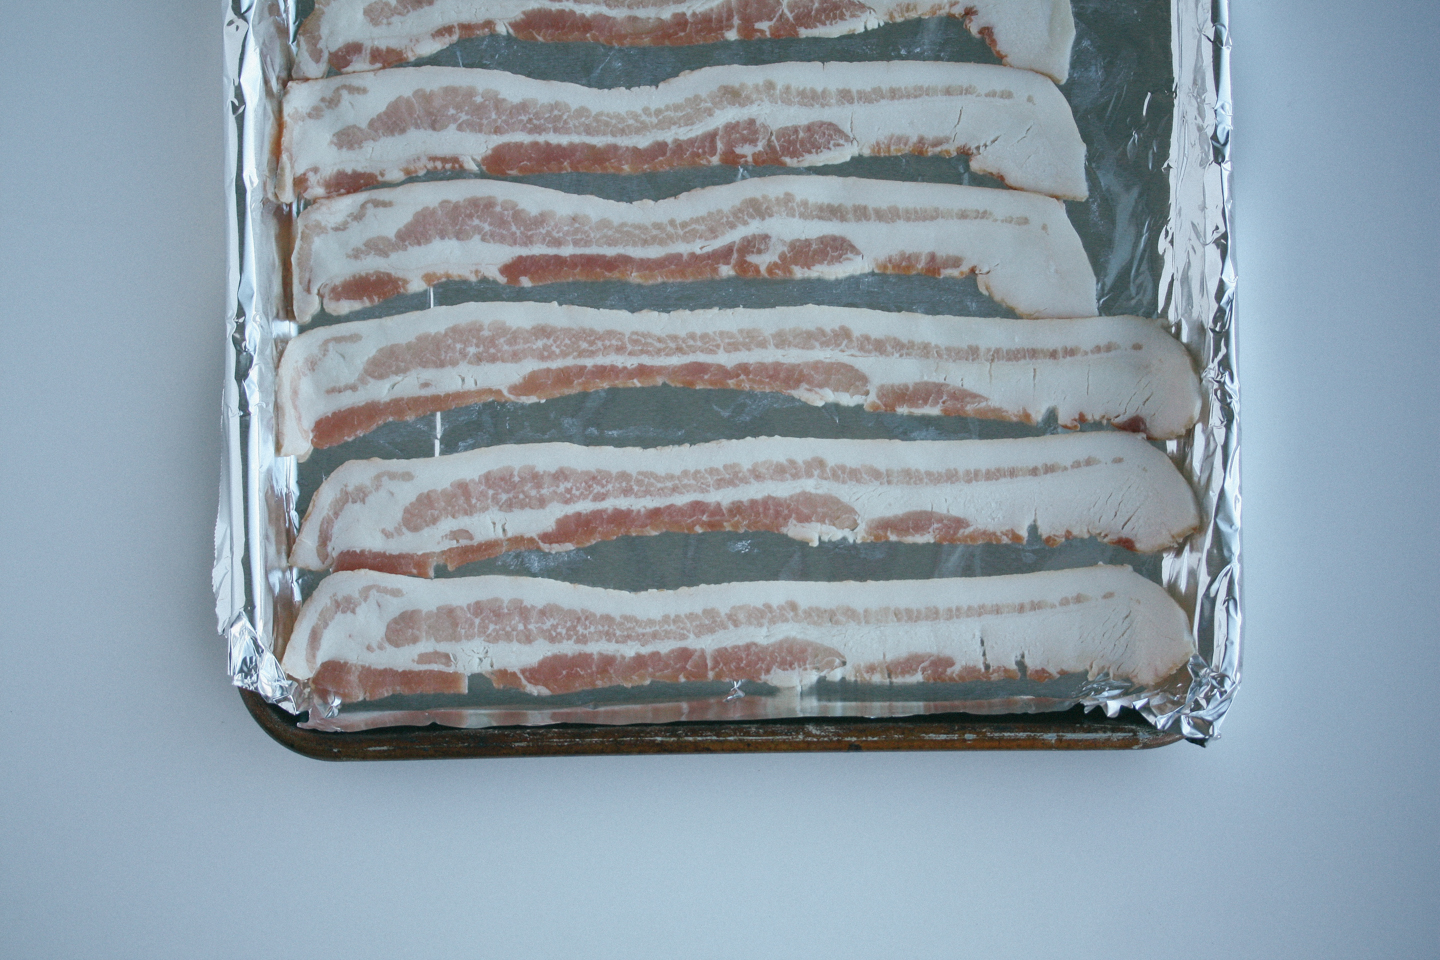 Load up the bacon on a foil lined baking sheet